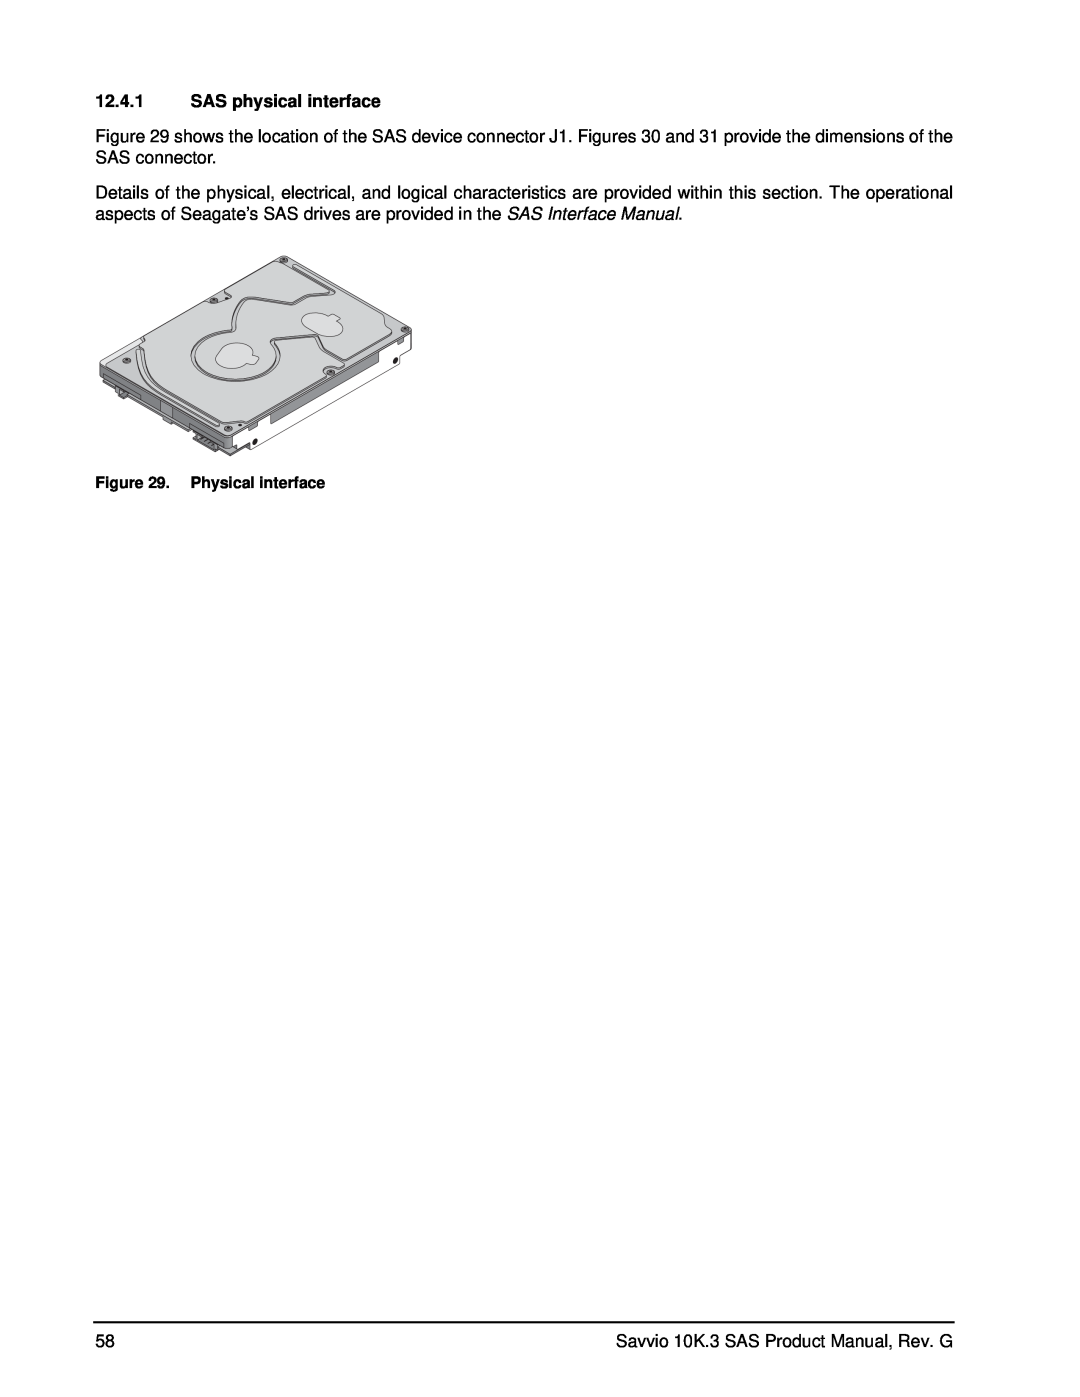 Seagate ST9300603SS, ST9300503SS, ST9300403SS, ST9146803SS, ST9146703SS manual SAS physical interface, Physical interface 